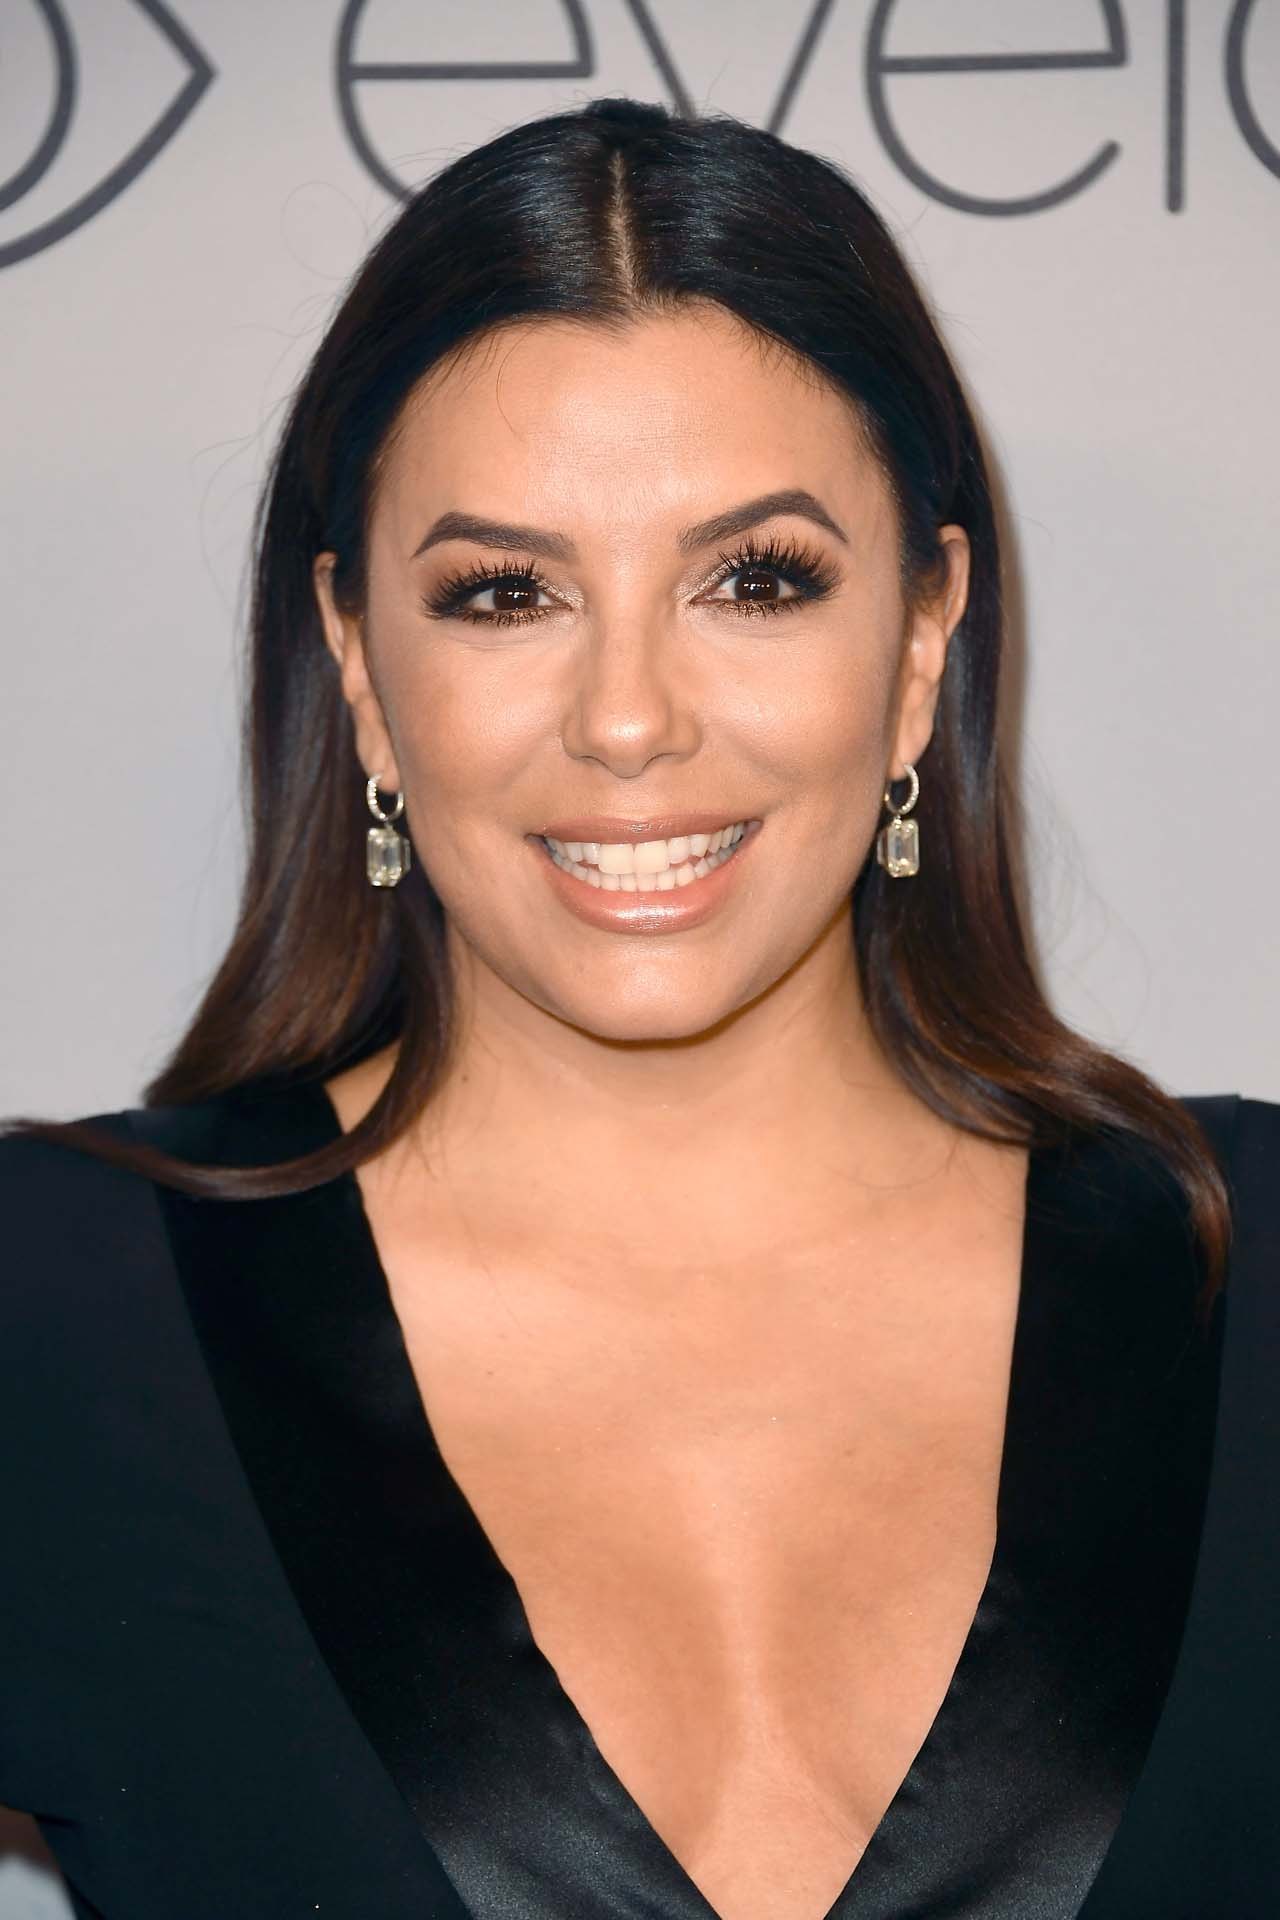 <h2>Eva Longoria</h2><p>In 2004—following <em>The Young and the Restless</em> yet prior to <em>Desperate Housewives</em>—Eva Longoria took on the role of Detective Martinez in <a href="http://www.imdb.com/title/tt0374212/" target="_blank" rel="noopener"><em>Señorita Justice</em></a>, a low-budget direct-to-video film which was quick to receive poor reviews. Thankfully, the actress then took on the role of Gabrielle Solis on the <em>Desperate Housewives</em> and as they say, the rest is history. </p>